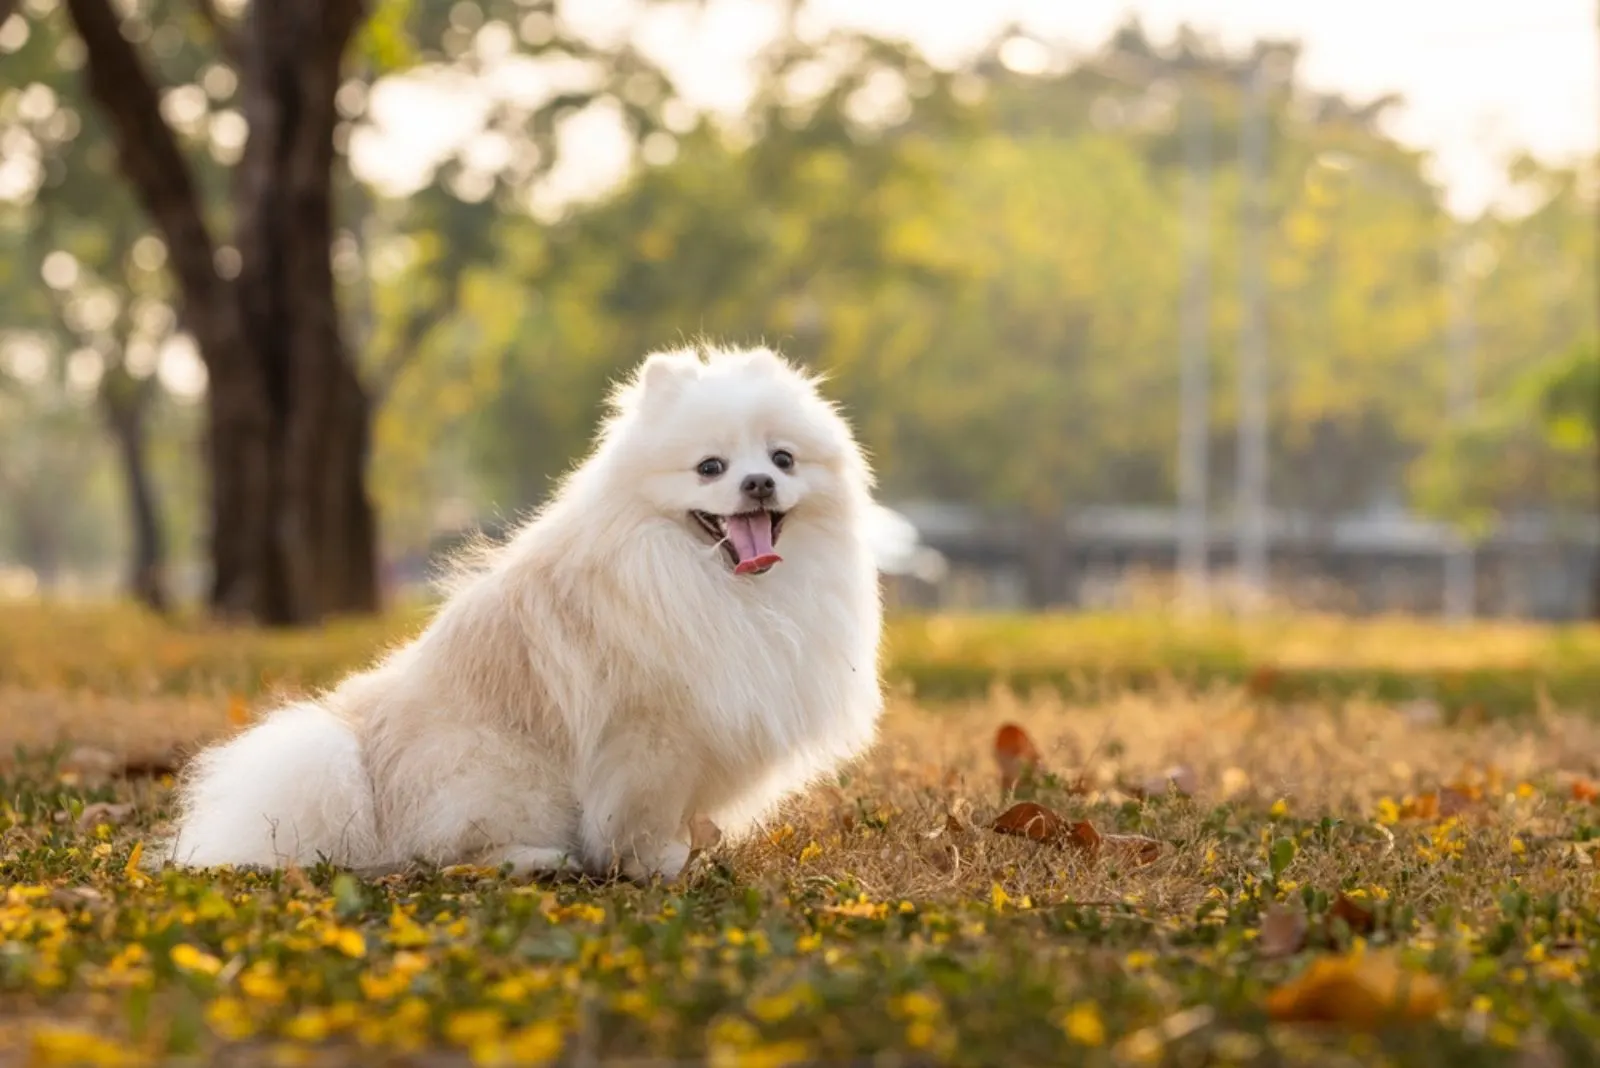 A white Japanese Spitz dog standing among yellow flowers